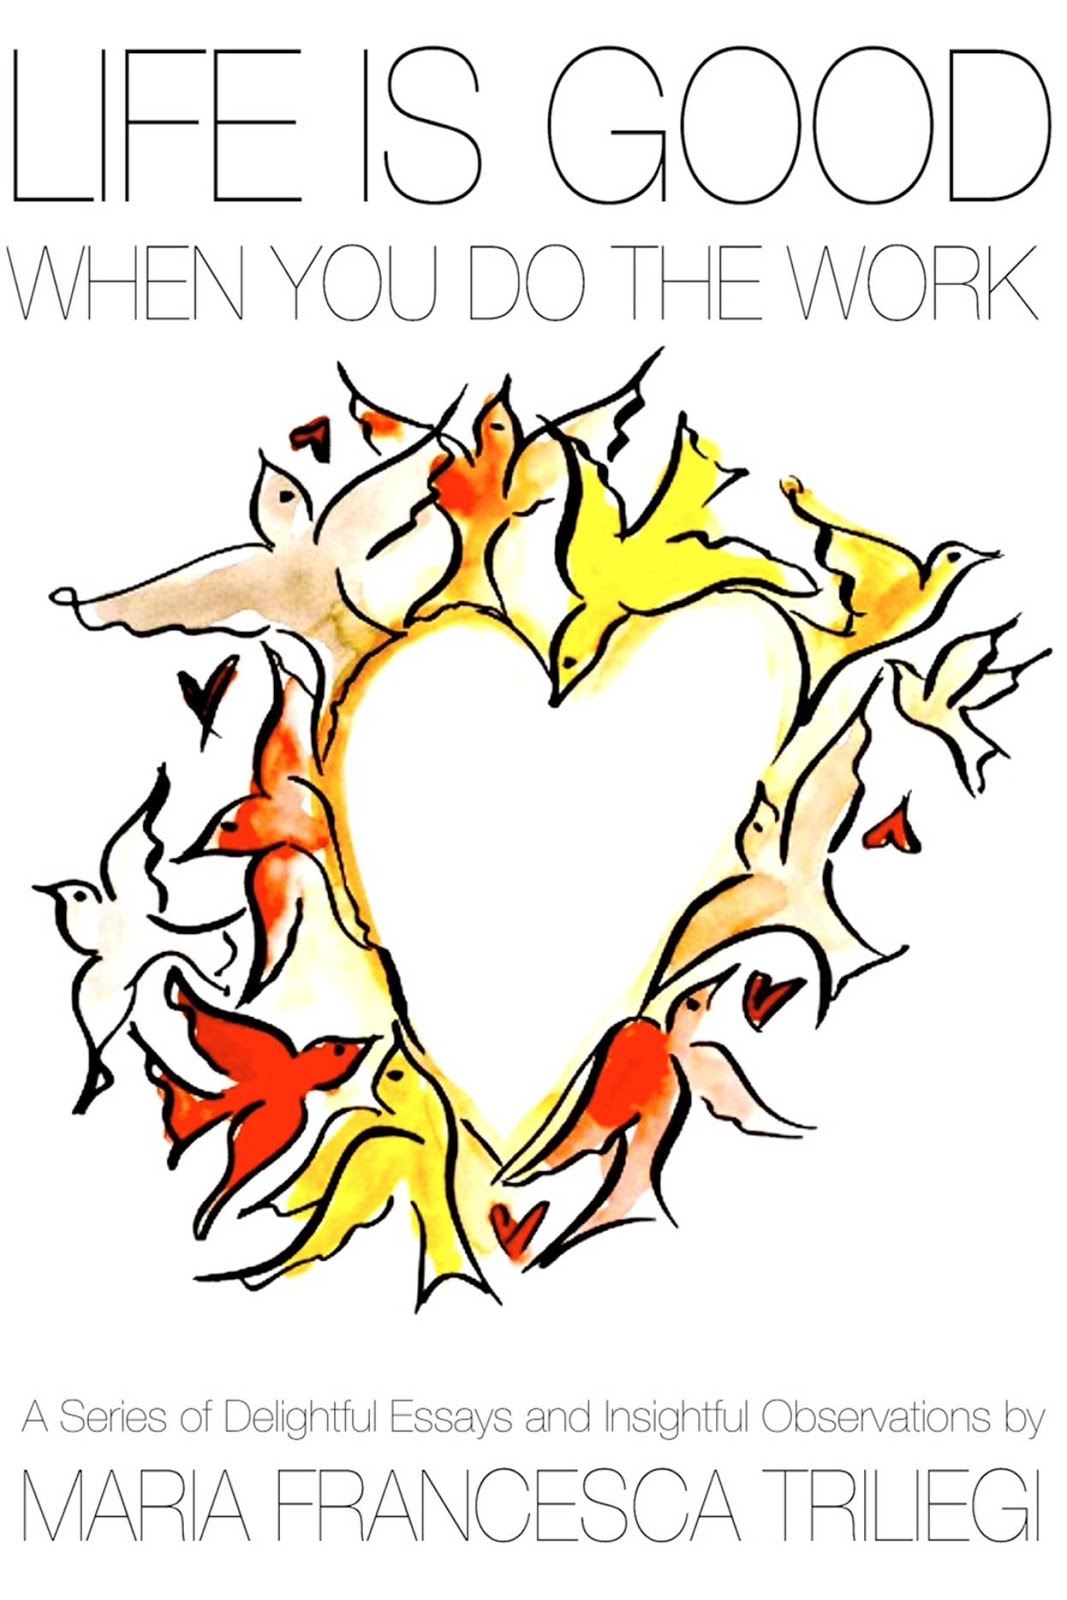 BUY THE NEW BOOK "LIFE IS GOOD: WhenYou Do The WORK" 40 ESSAYS / 176pp Paperback